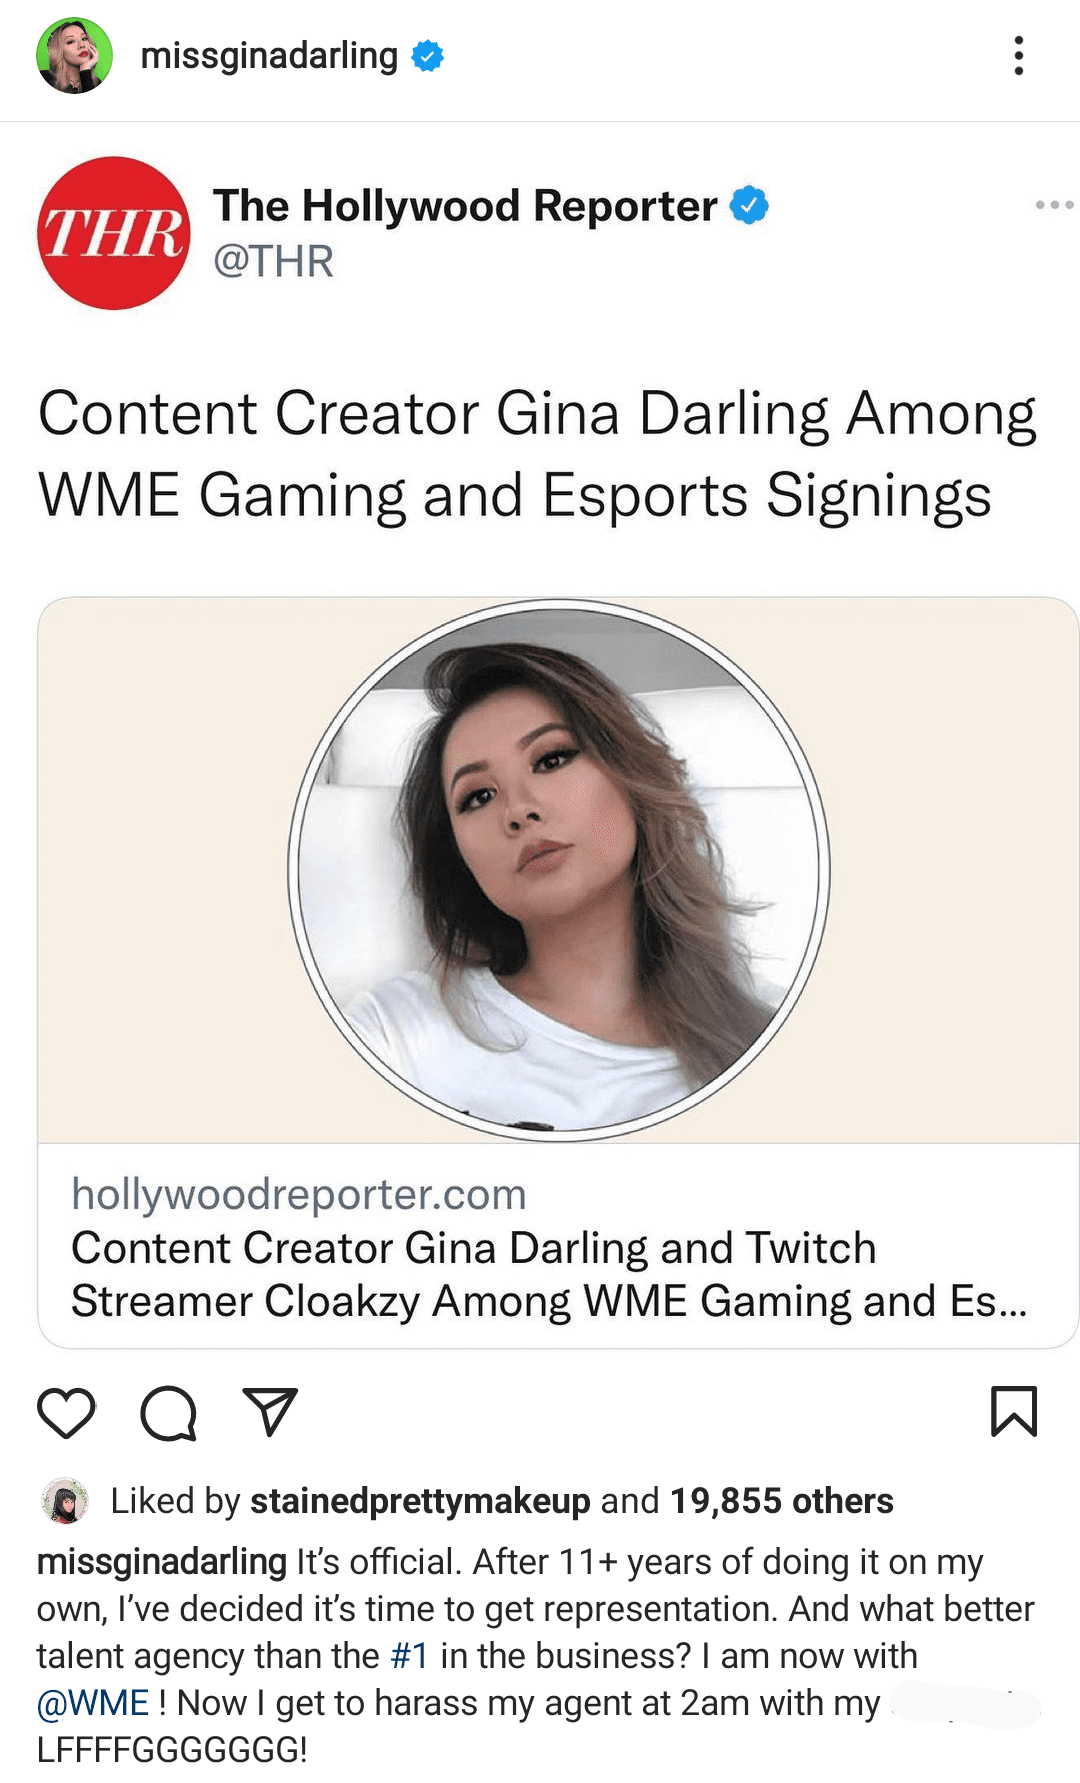 Gina Darling's Instagram post confirming her WME signing, shared on August 24, 2021 | Photo: Instagram/missginadarling